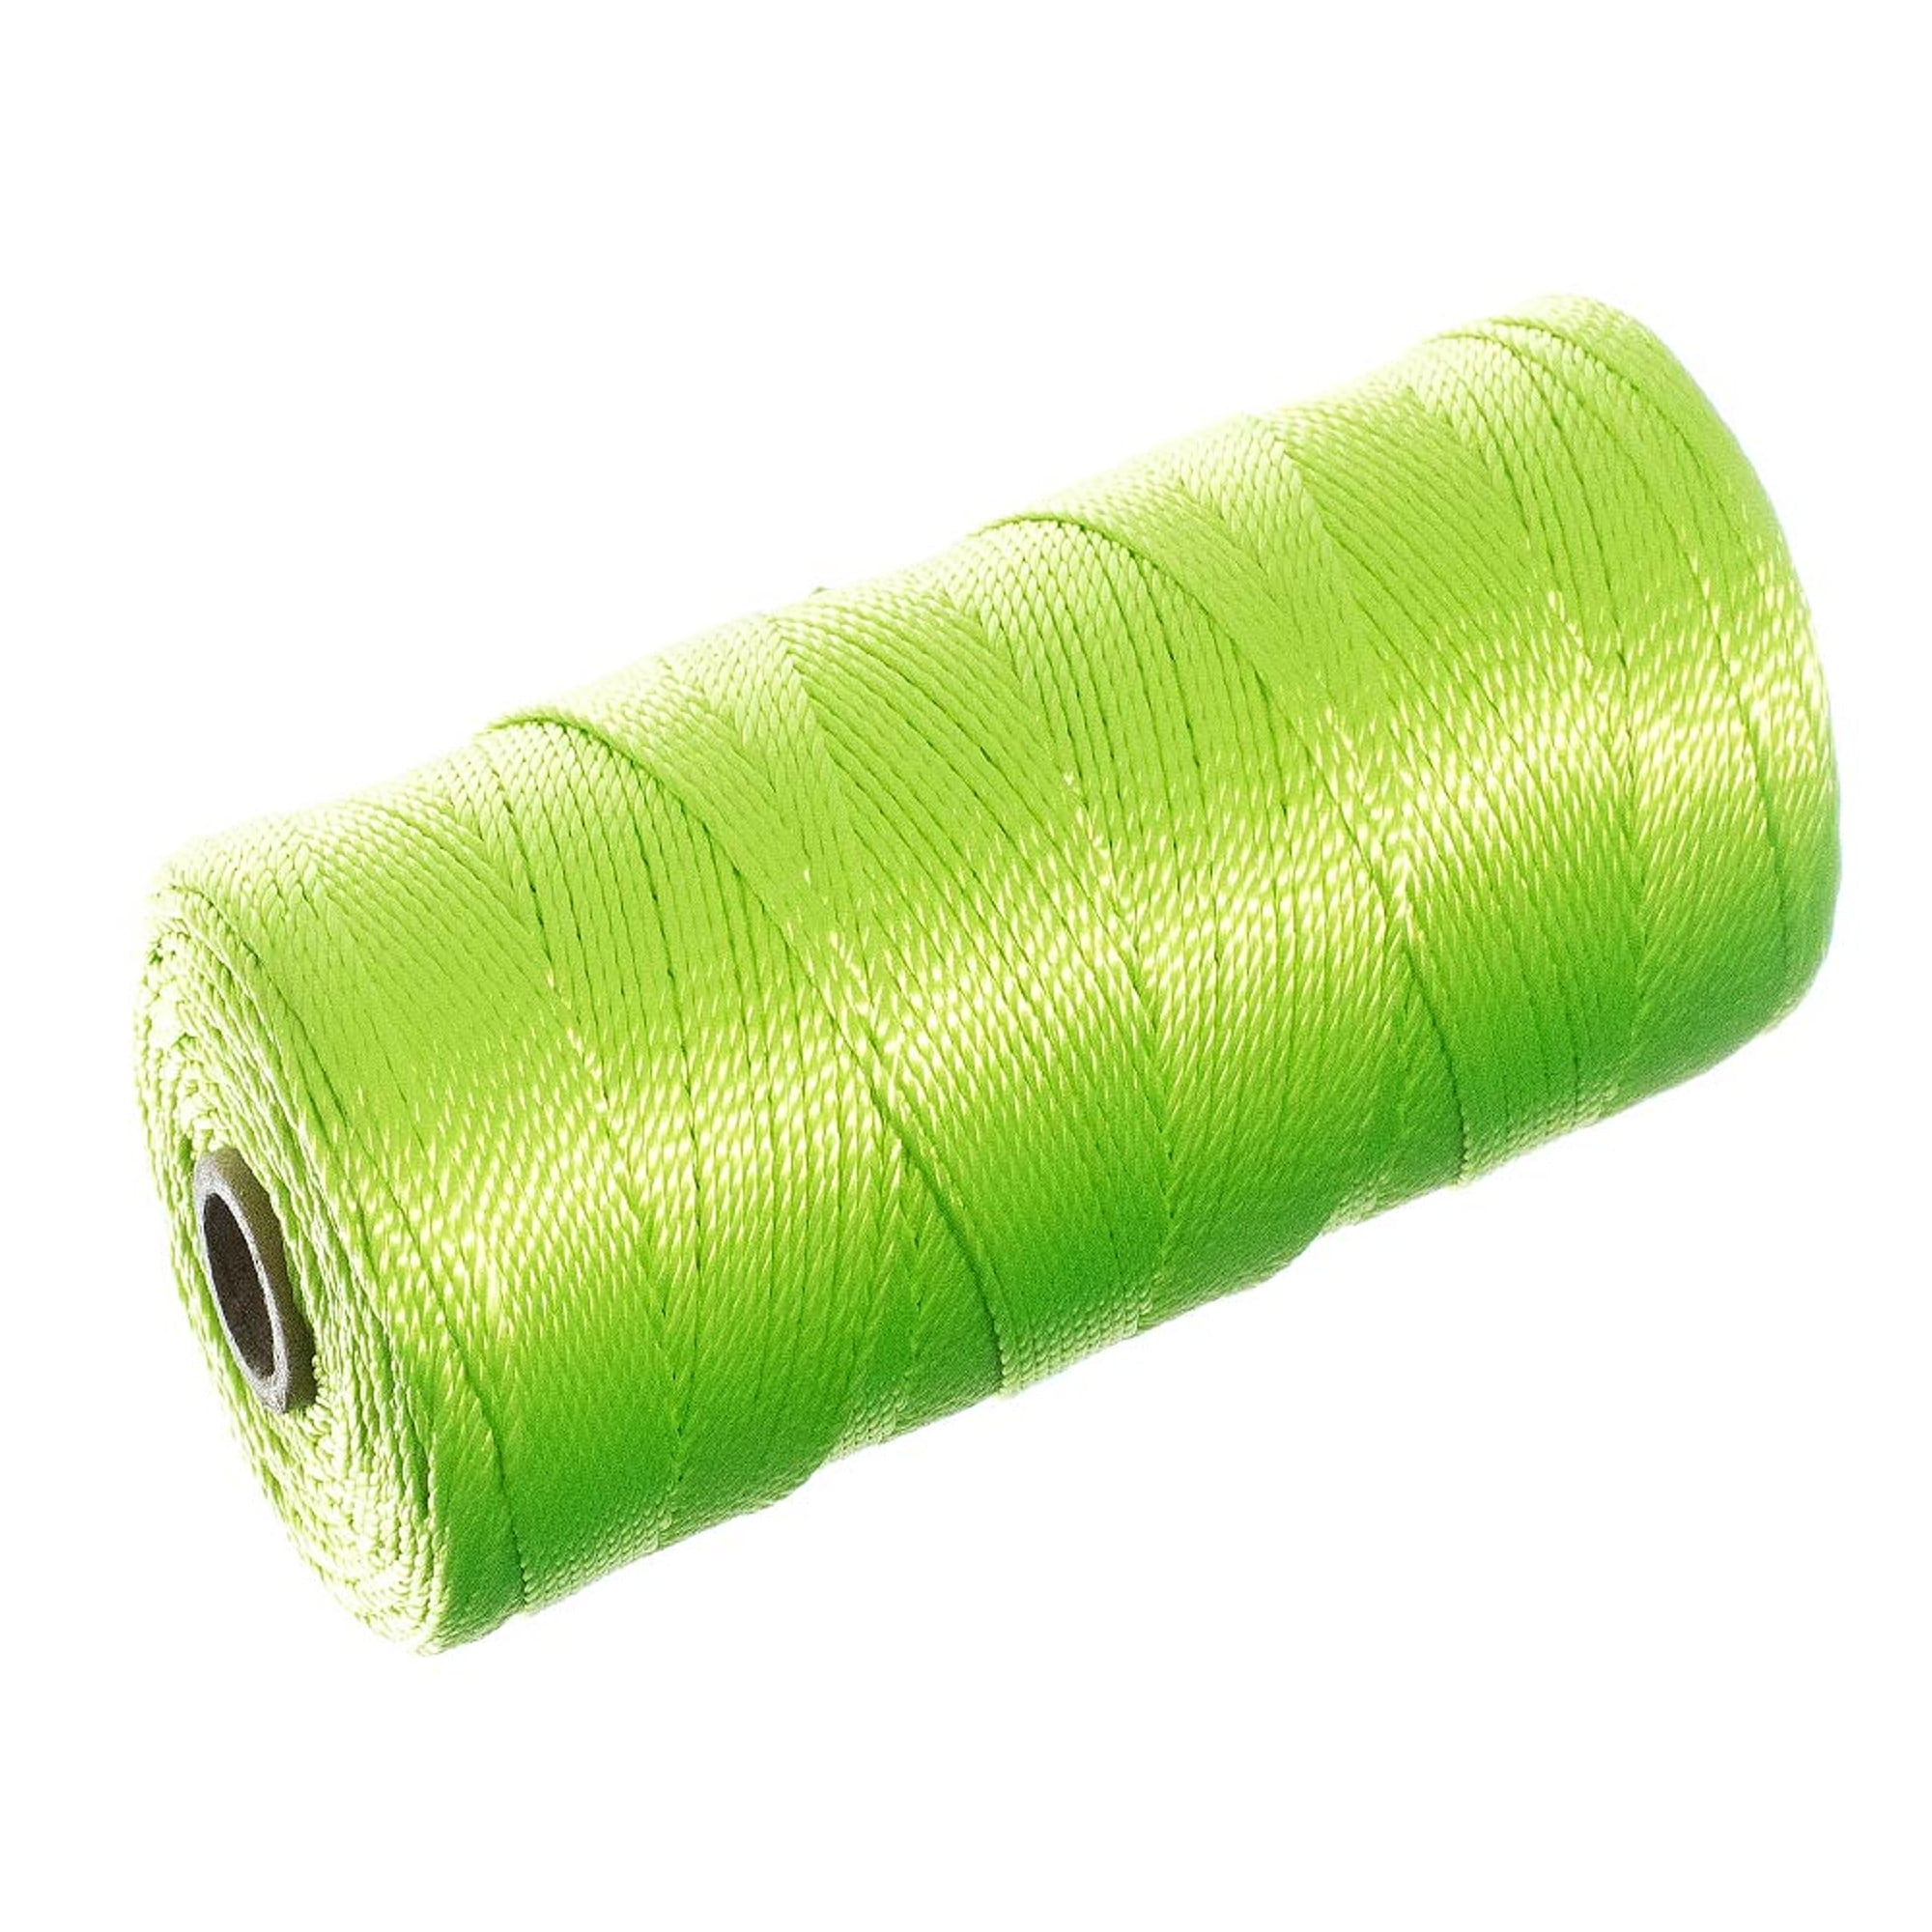 White Mason Line String Line - #18 Braided Nylon String - 250 Ft Length -  Nylon Twine for Gardening Or Masonry Tools - Perfect Construction String  for